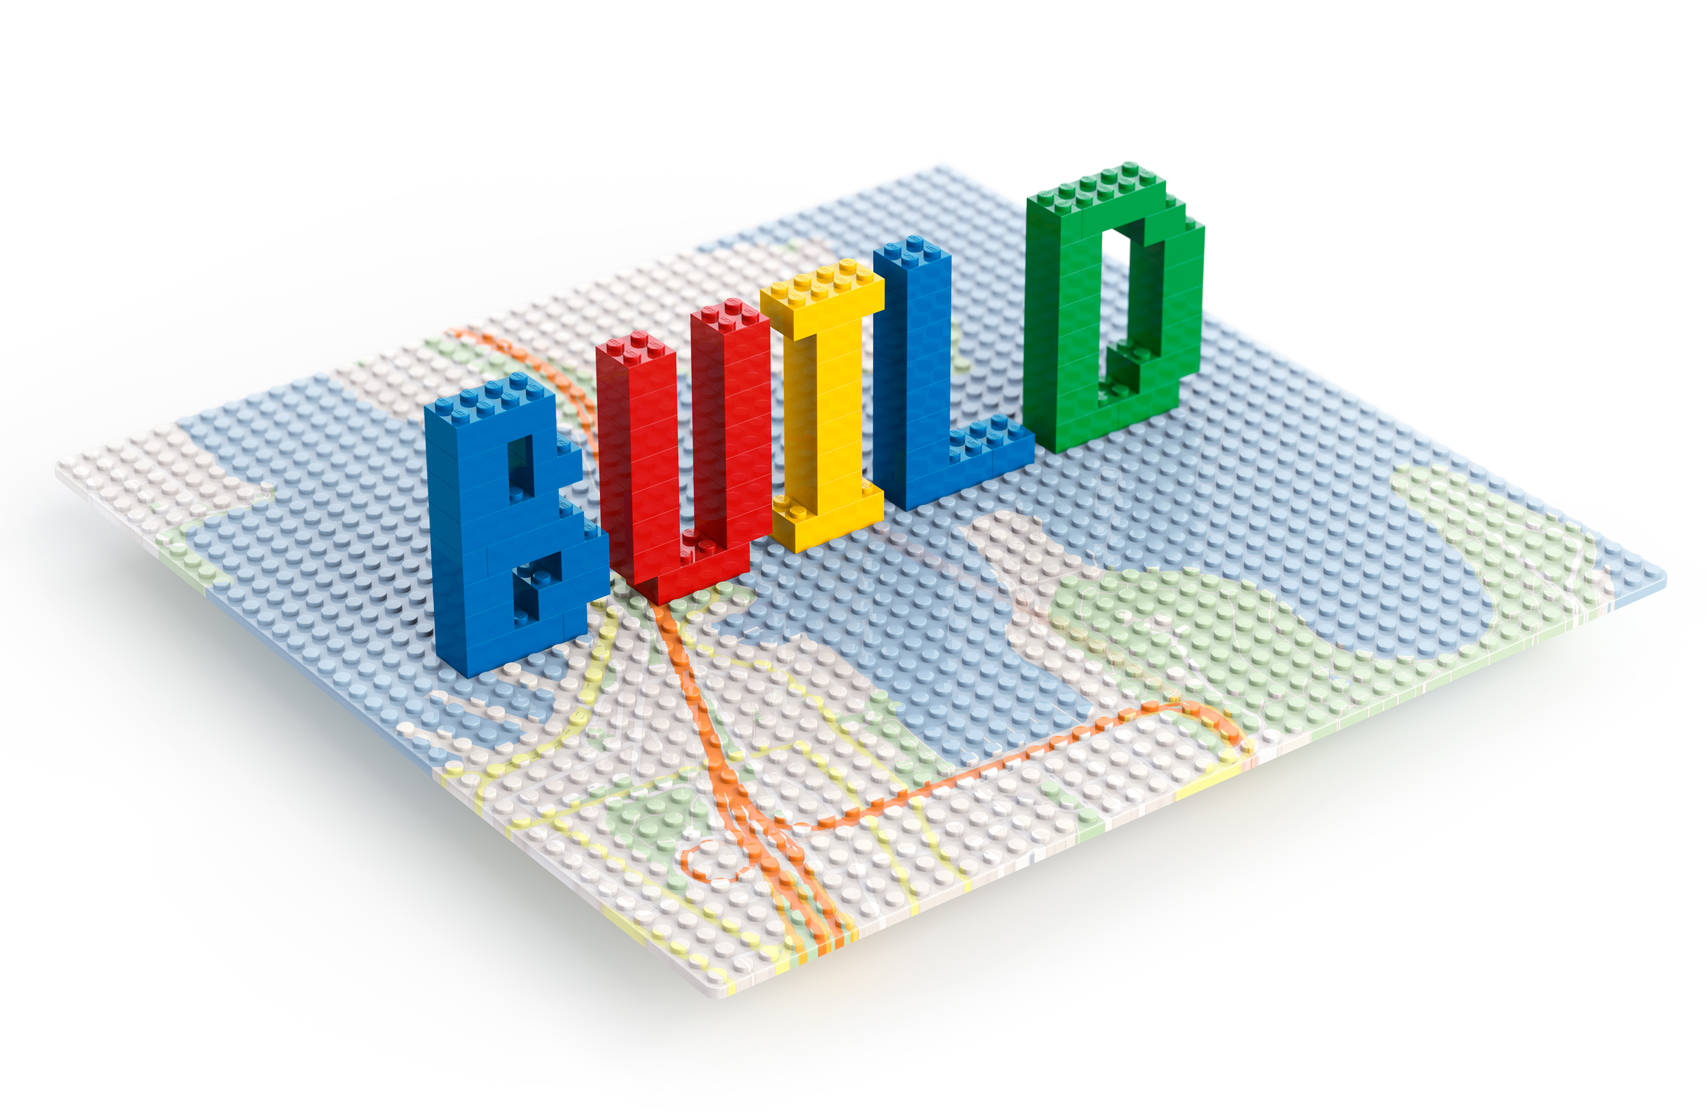 Mark Launches Campaign For Google Chrome With LEGO® 